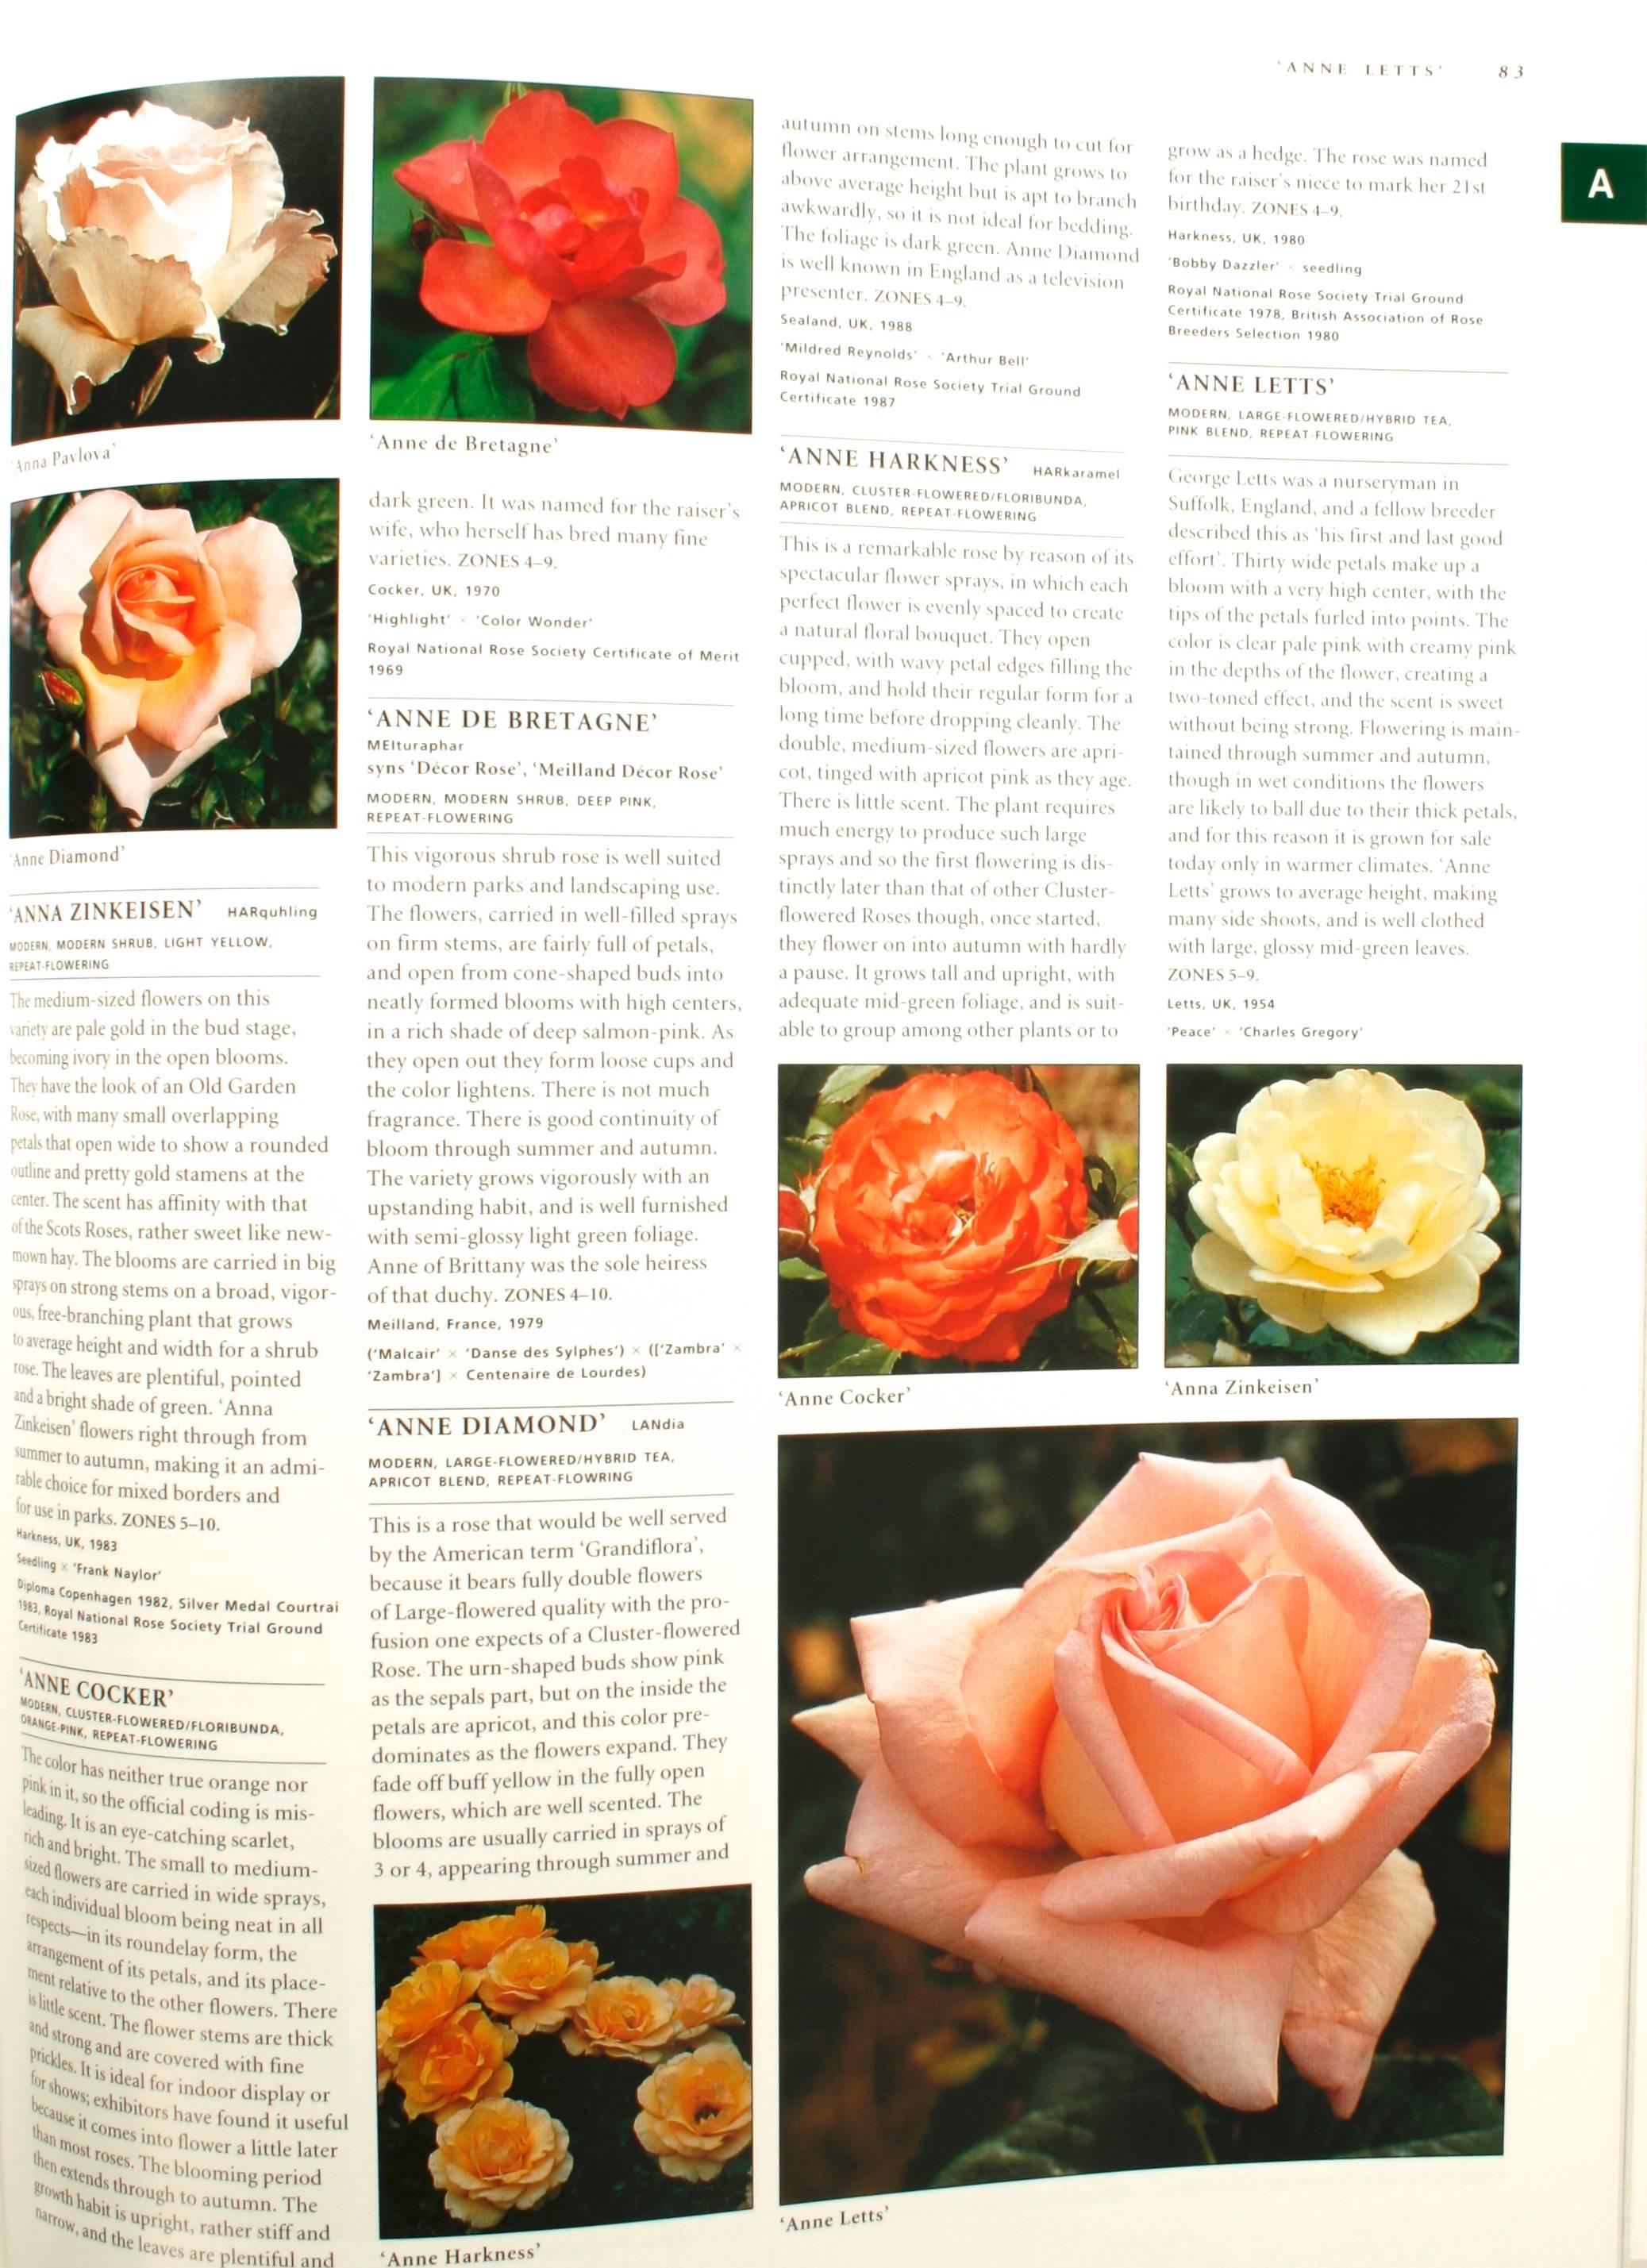 Botanica's Roses, The Encyclopedia of Roses 1